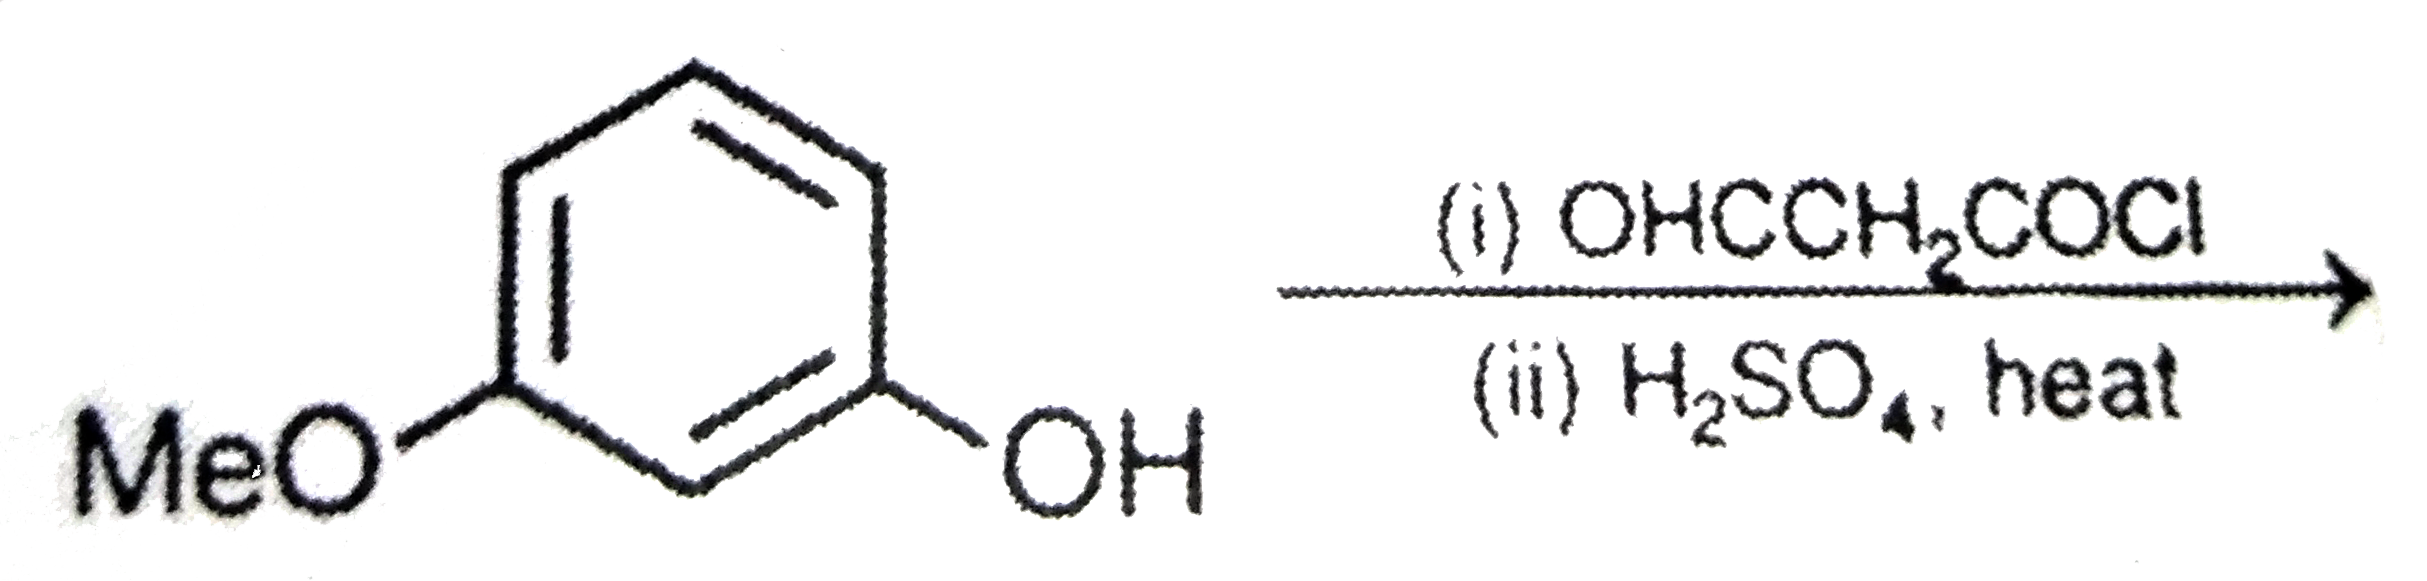 The major product of the following reactions is :